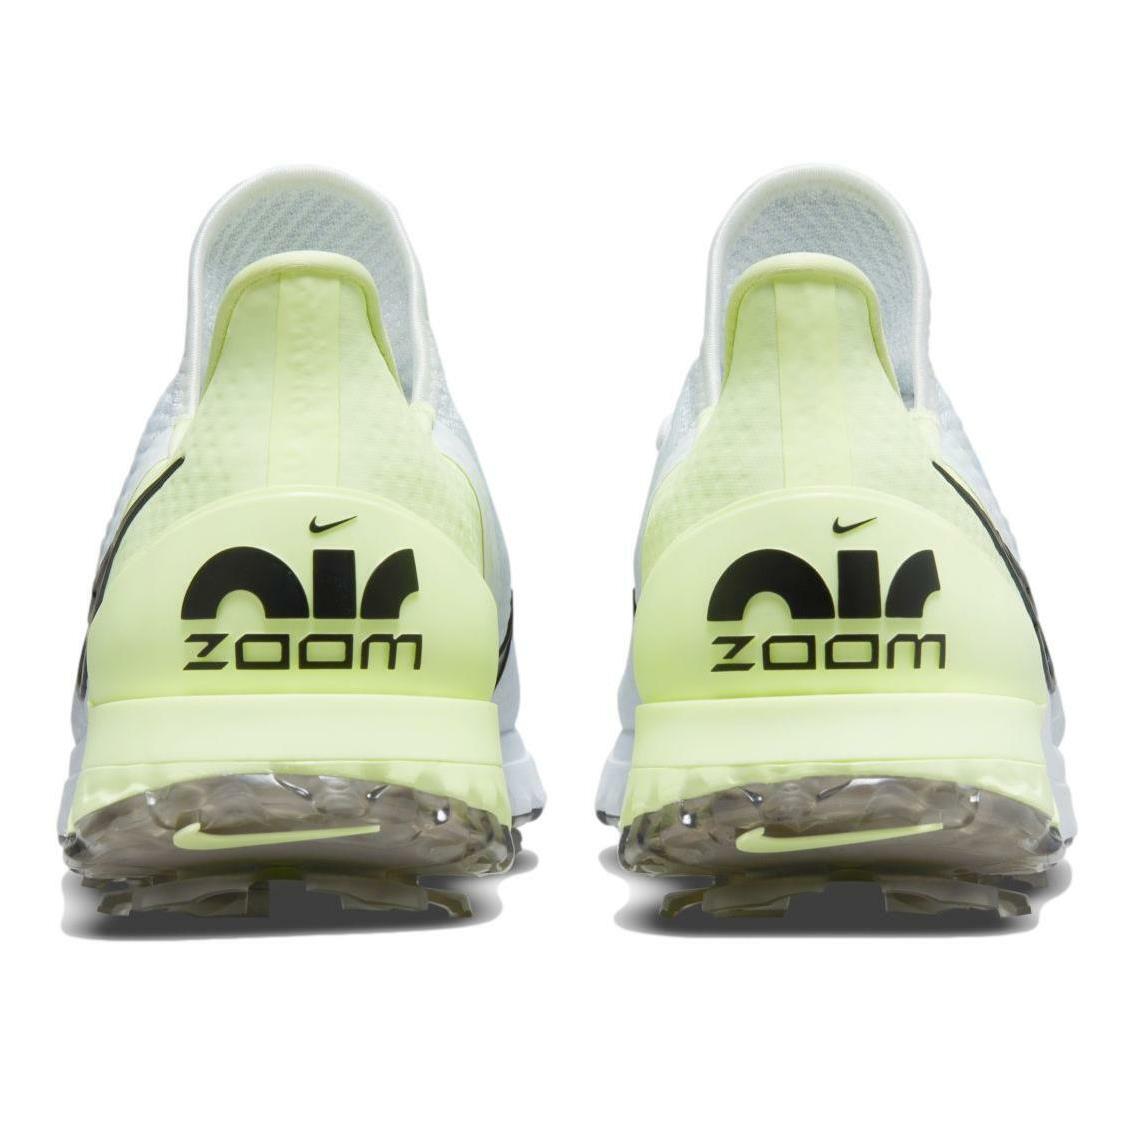 Nike shoes Air Zoom Infinity - White/Black-Barely Volt-Volt 4